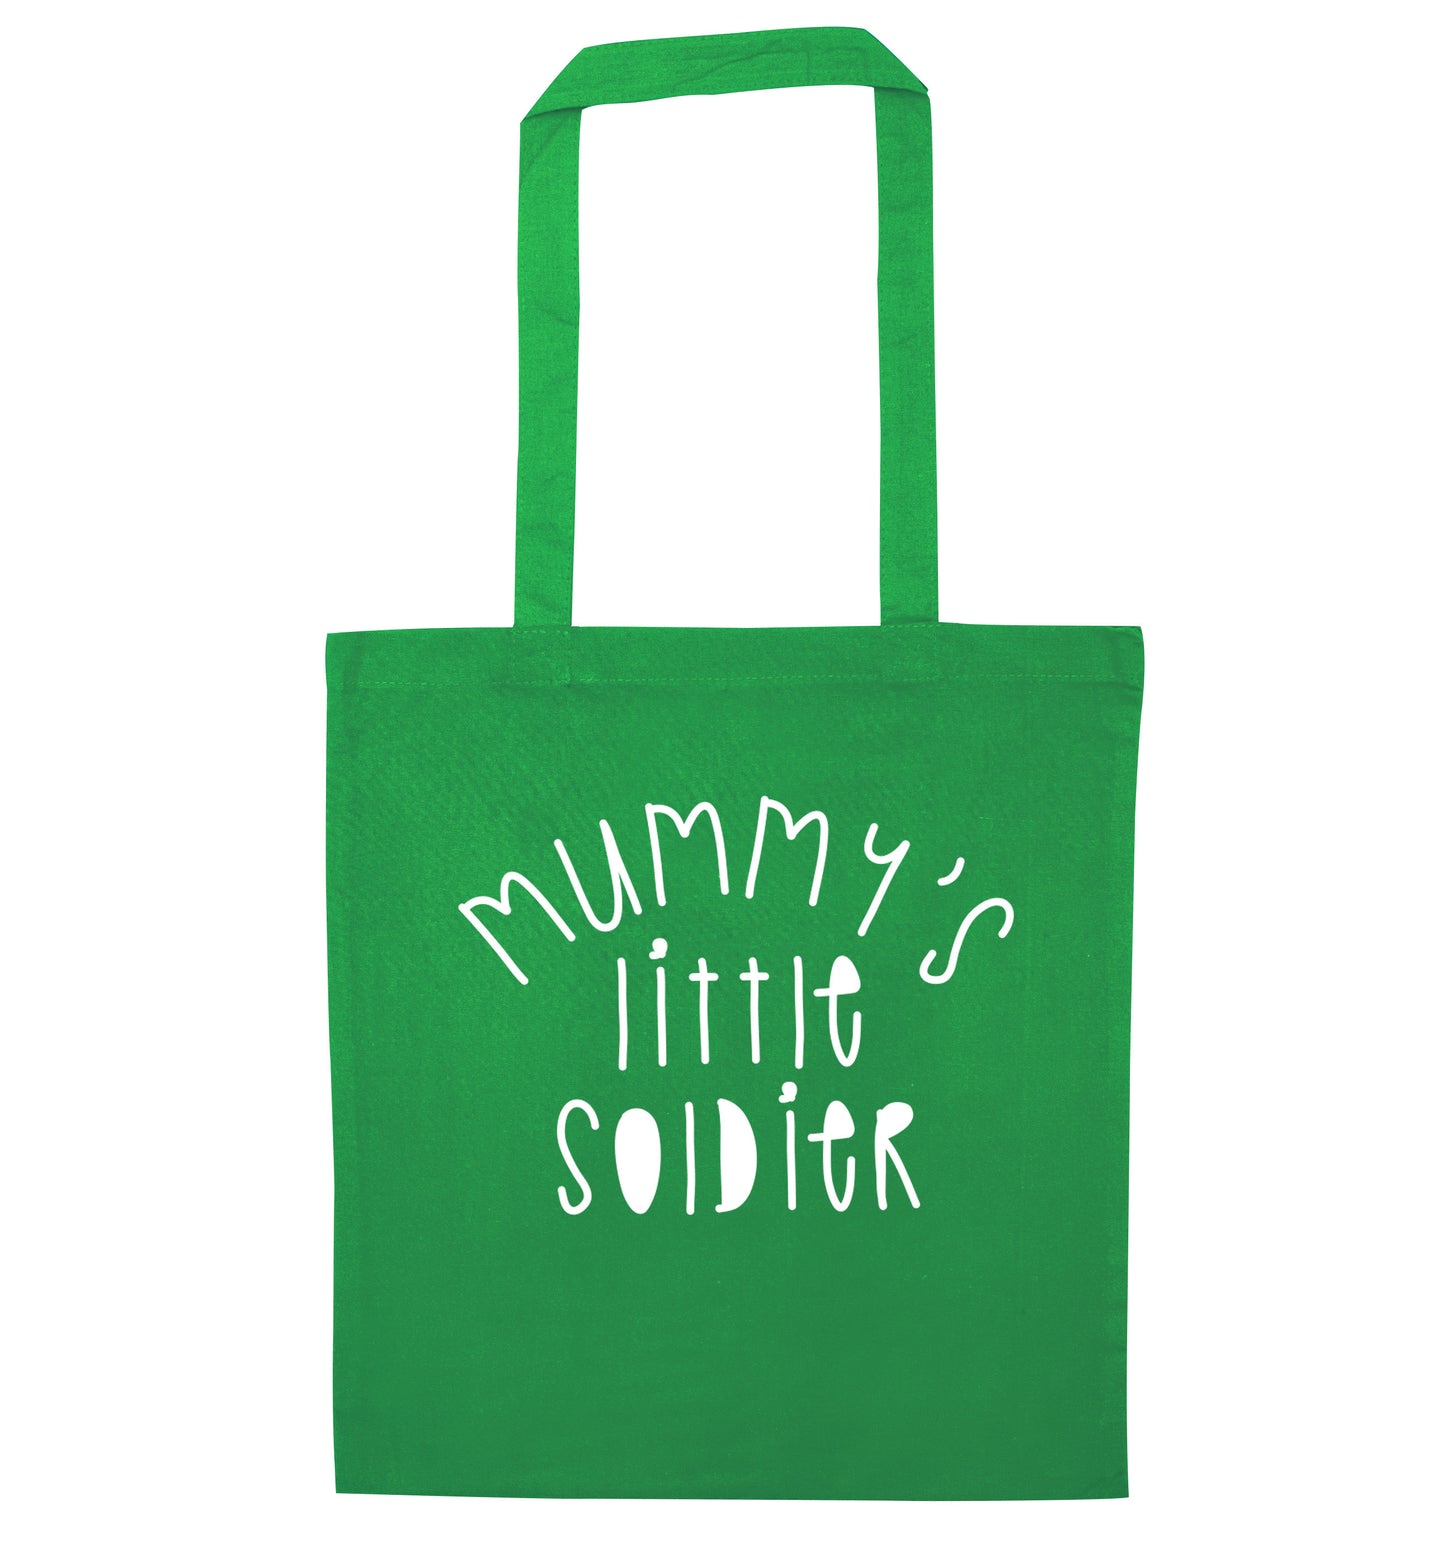 Mummy's little soldier green tote bag